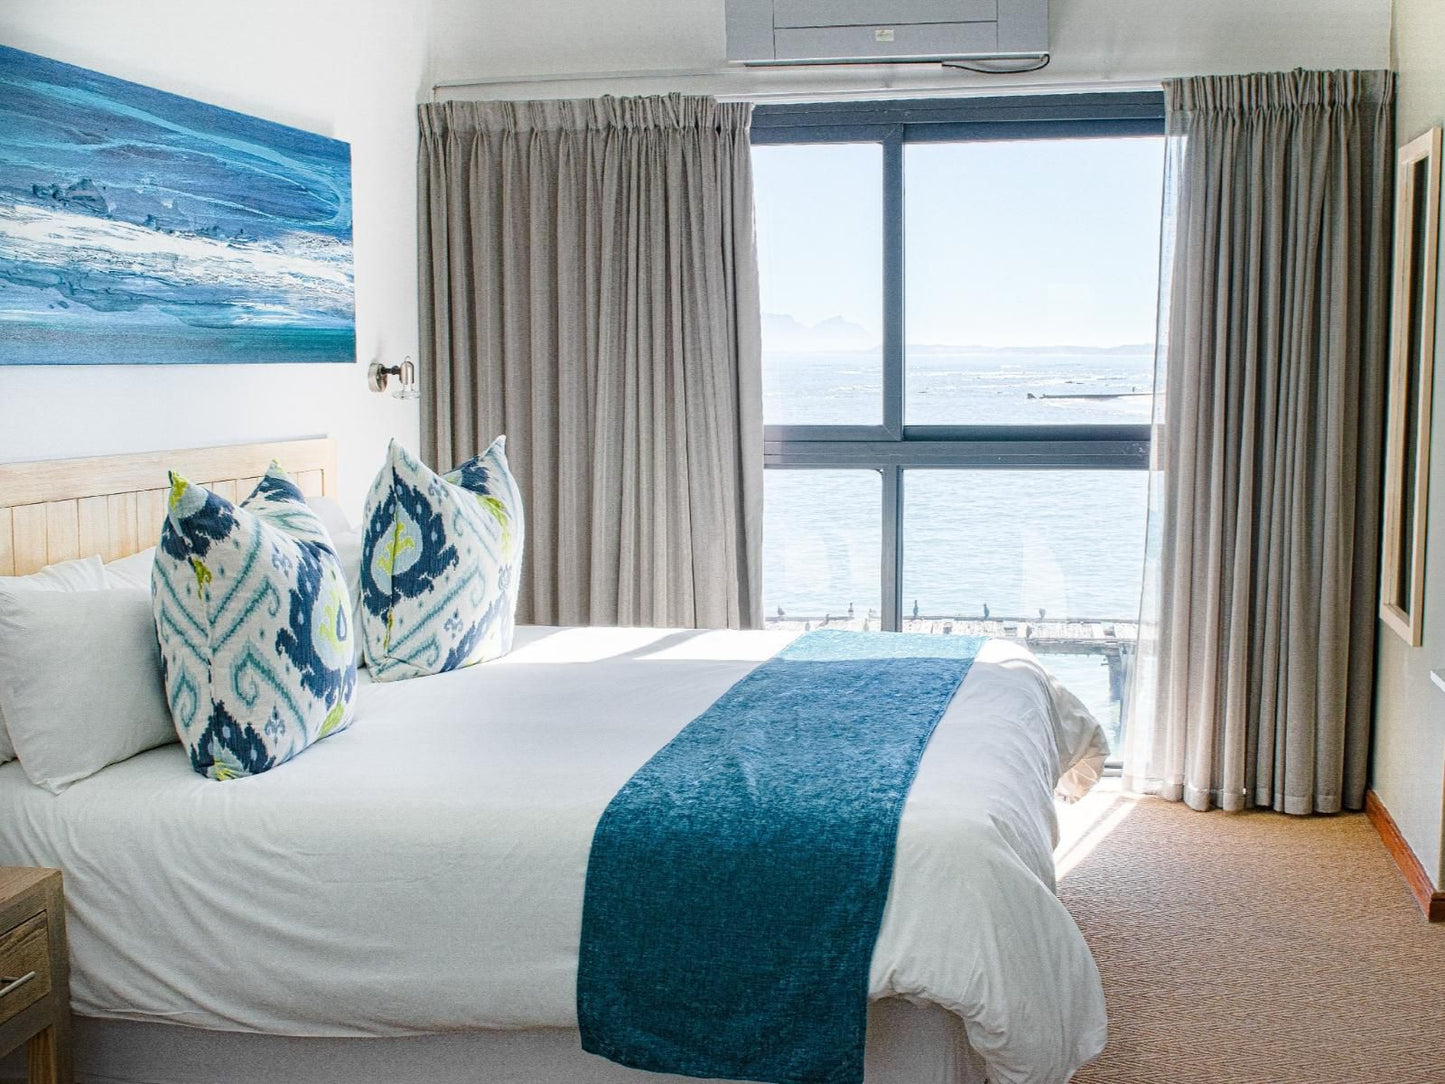 Strand Pavilion Van Ryneveld Strand Strand Western Cape South Africa Bedroom, Ocean, Nature, Waters